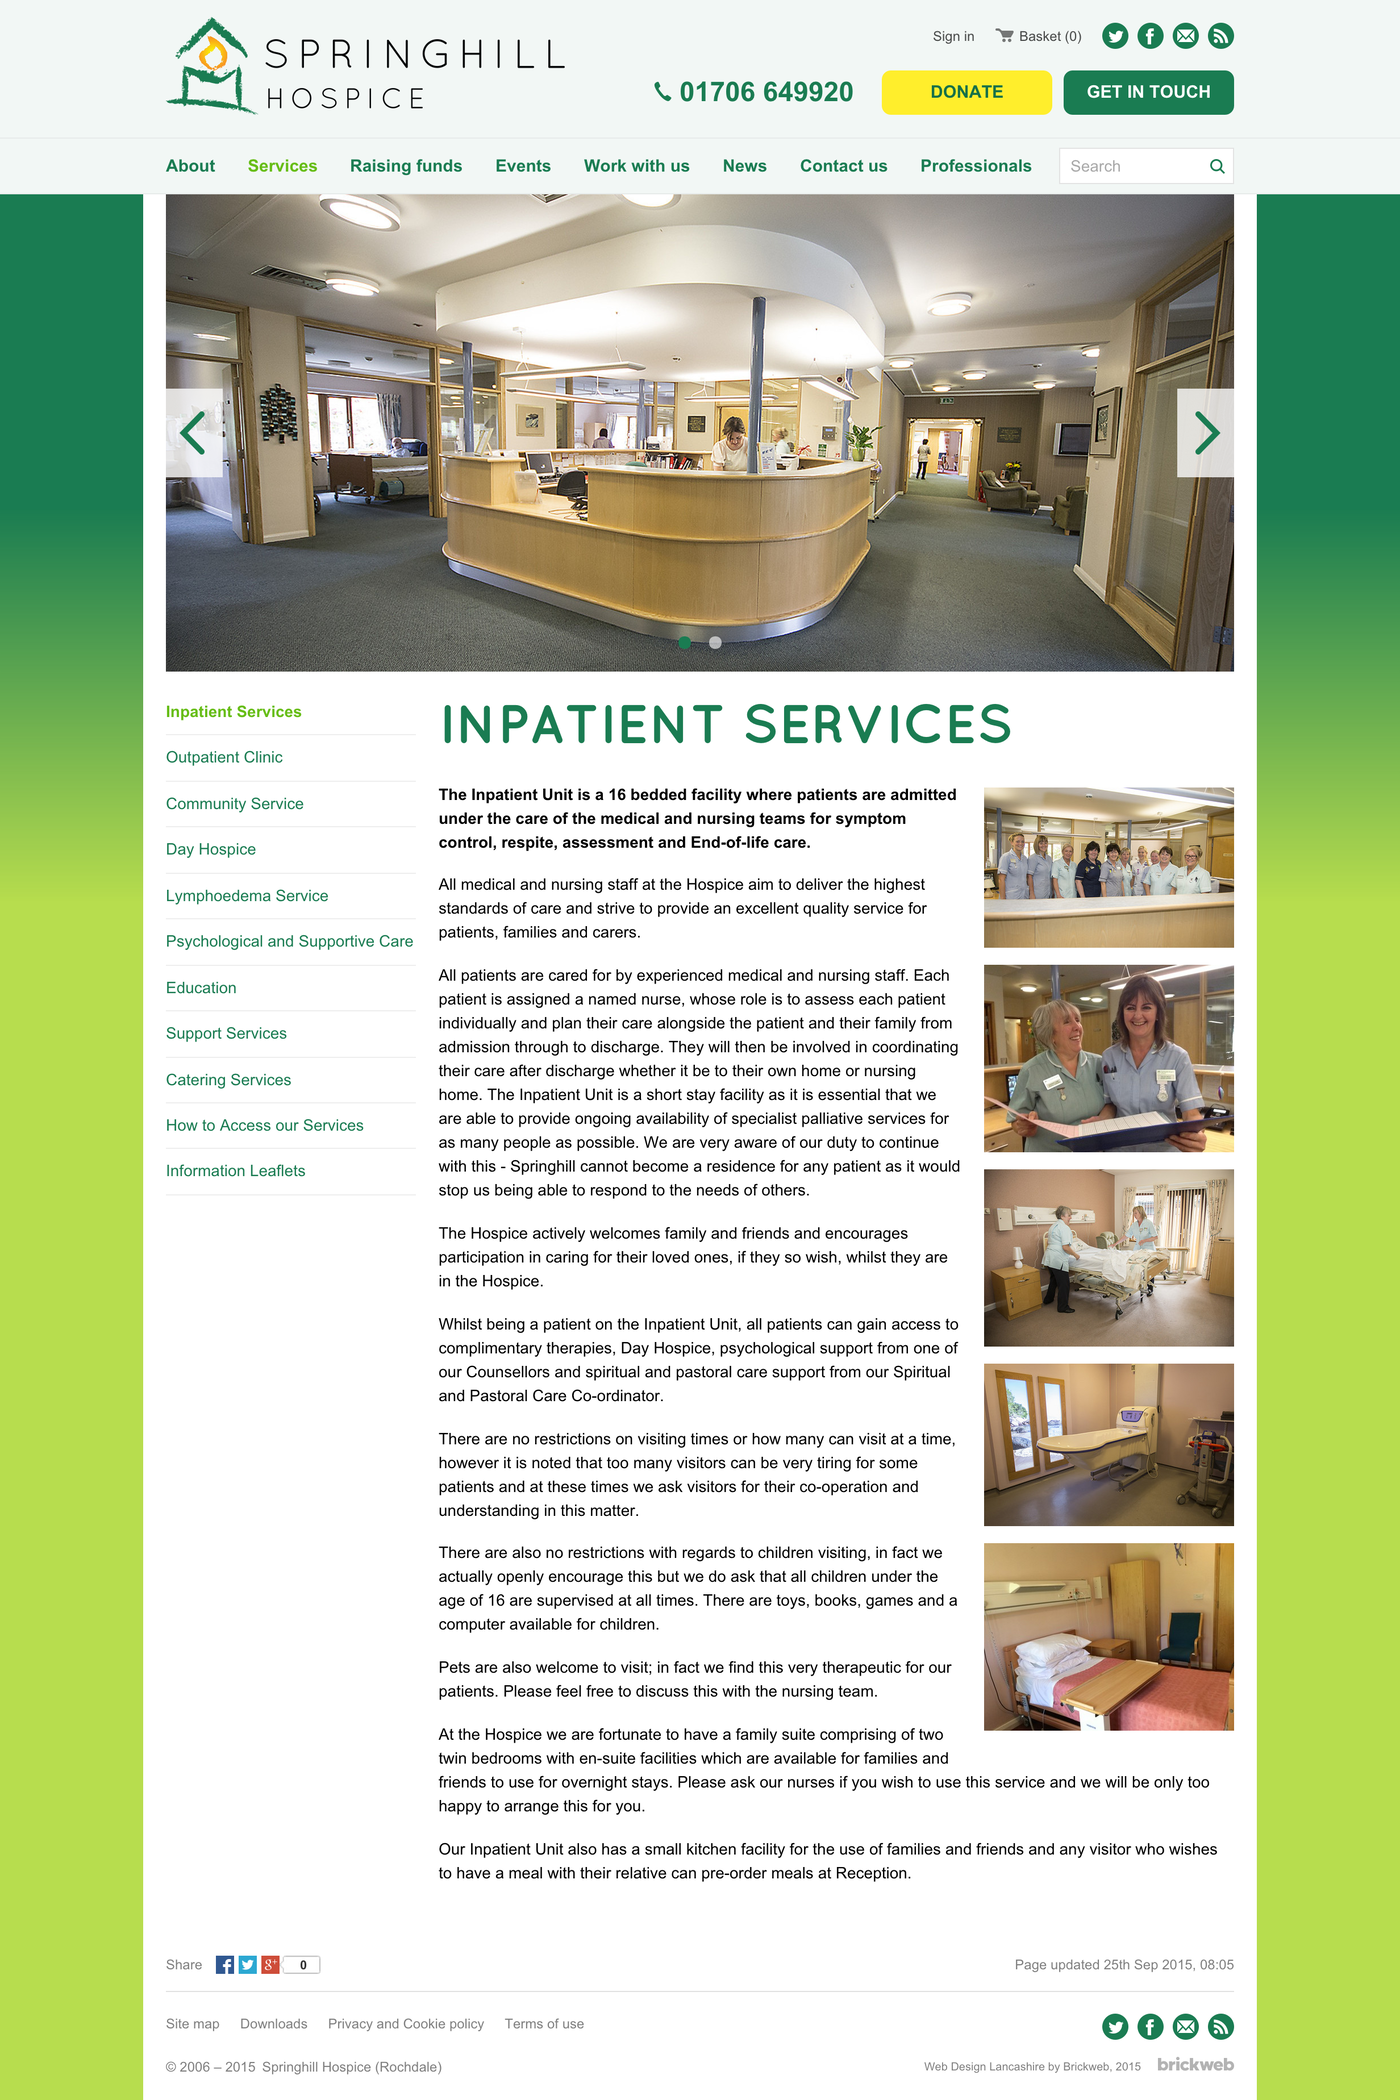 Springhill Hospice Inpatient Services